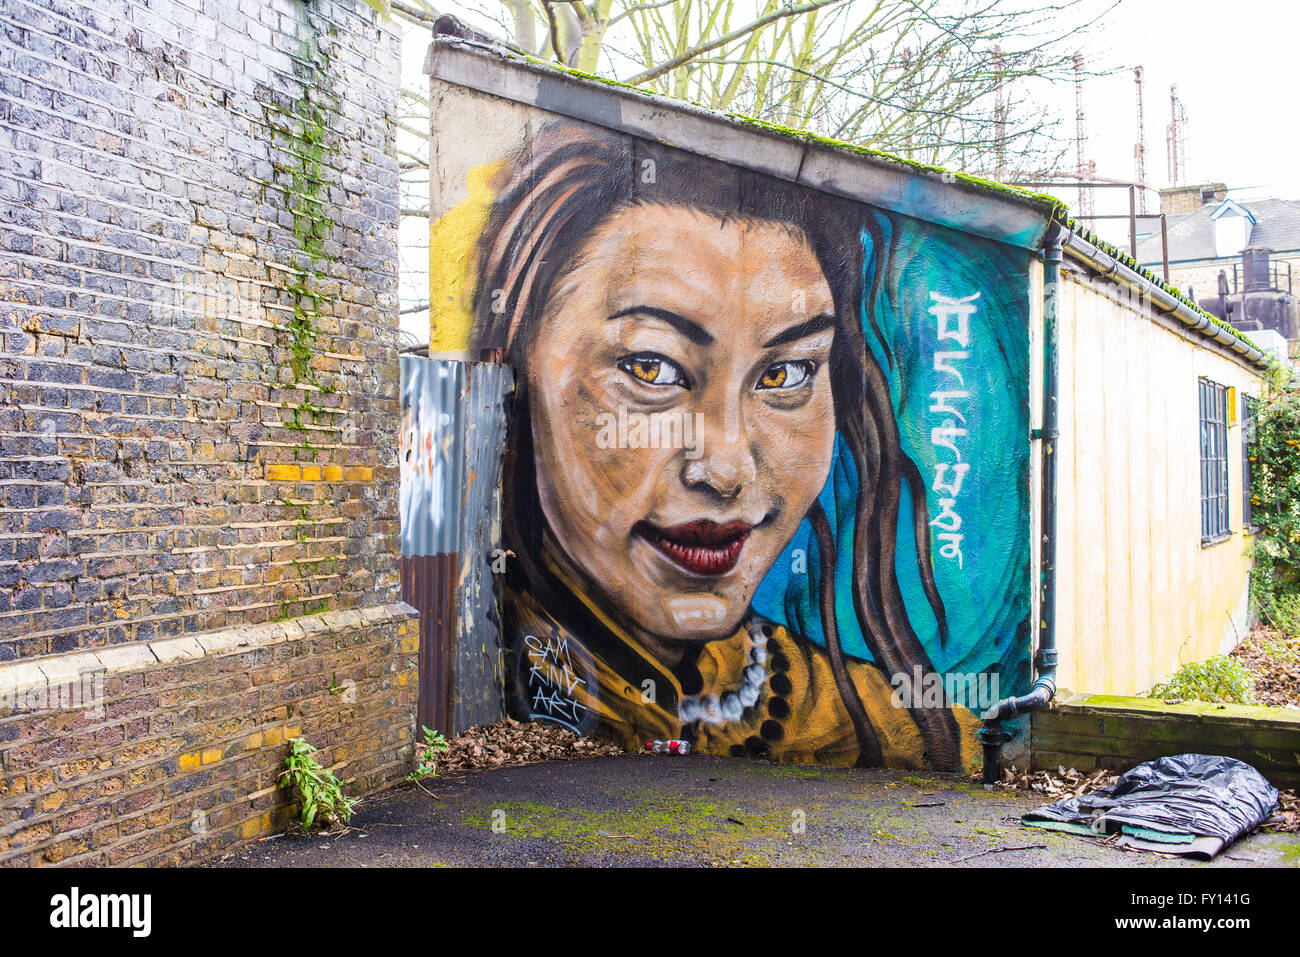 Mural graffiti representing a smiling Asian girl painted on the wall of a small building. Brick wall on the side. Stock Photo